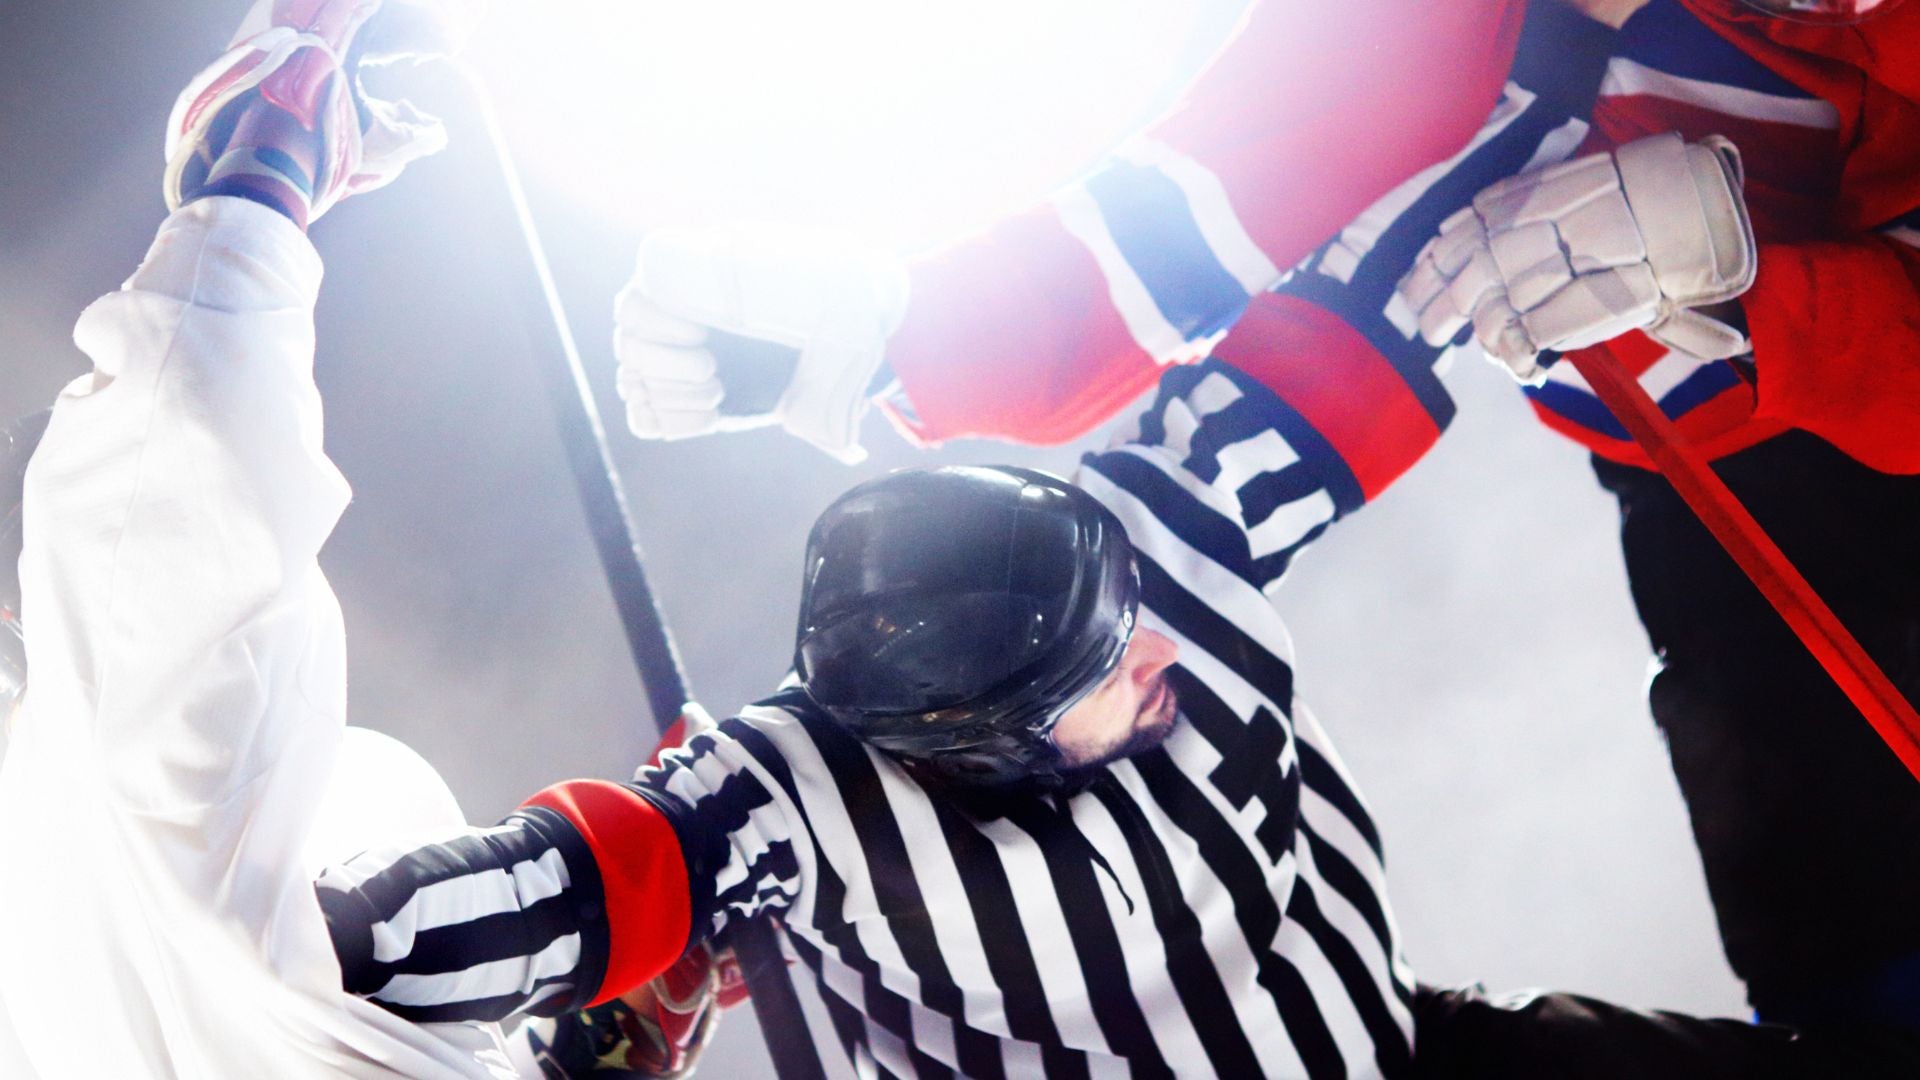 From Stick Handling to Fist Handling: A Brief History of Fighting in Hockey